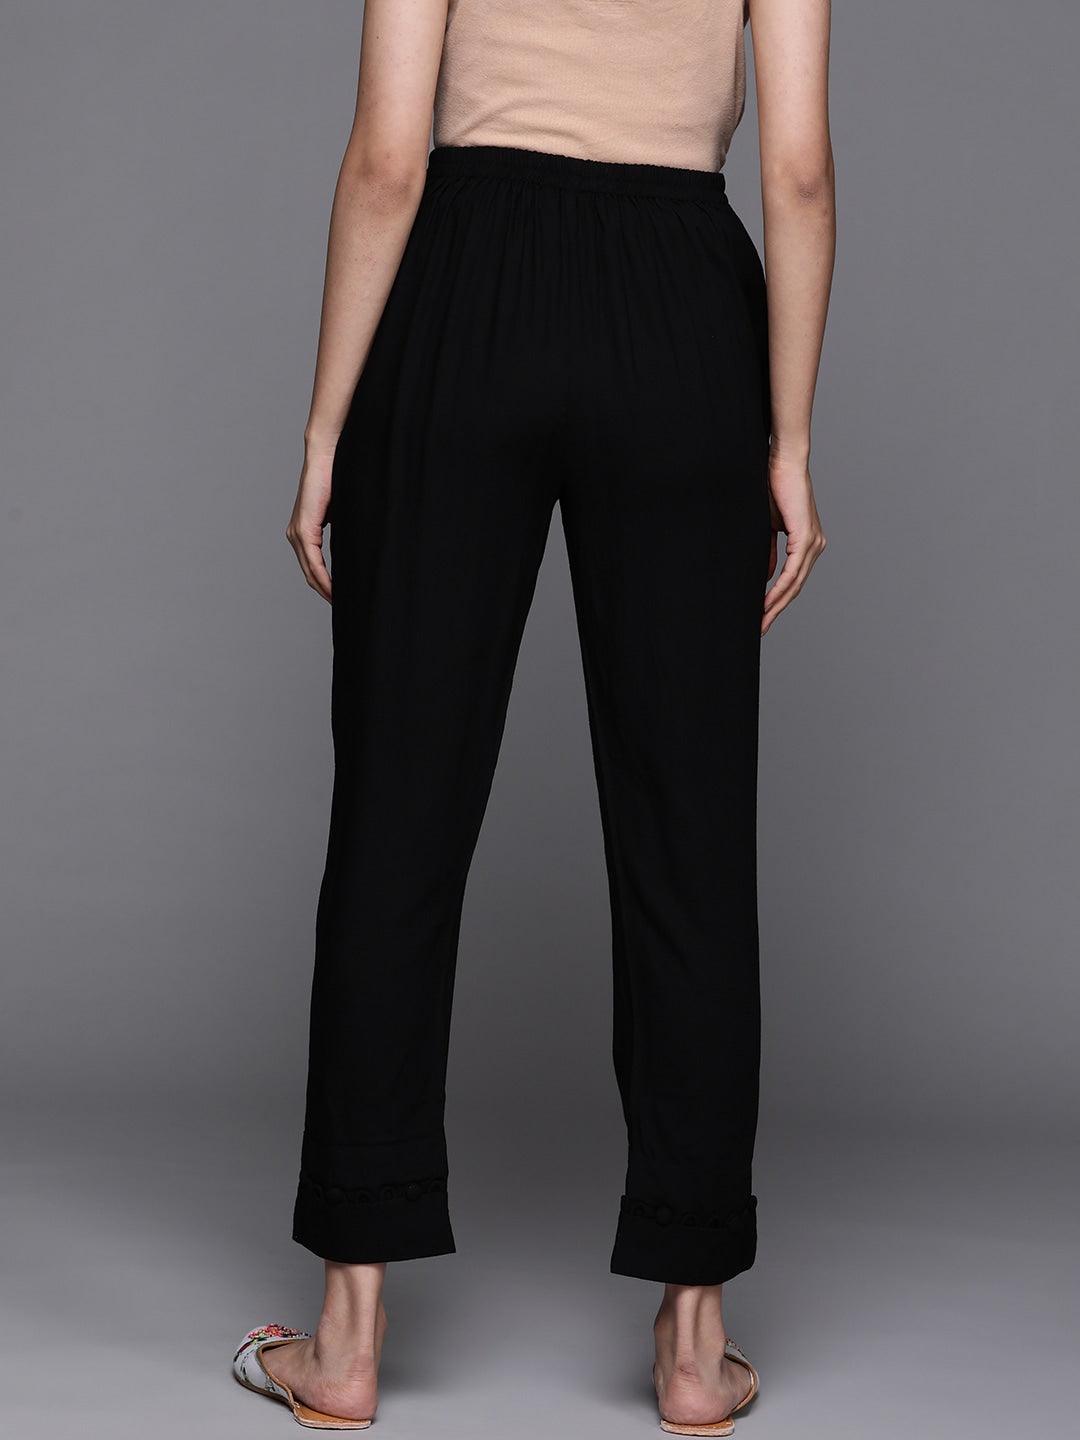 Black Solid Rayon Trousers